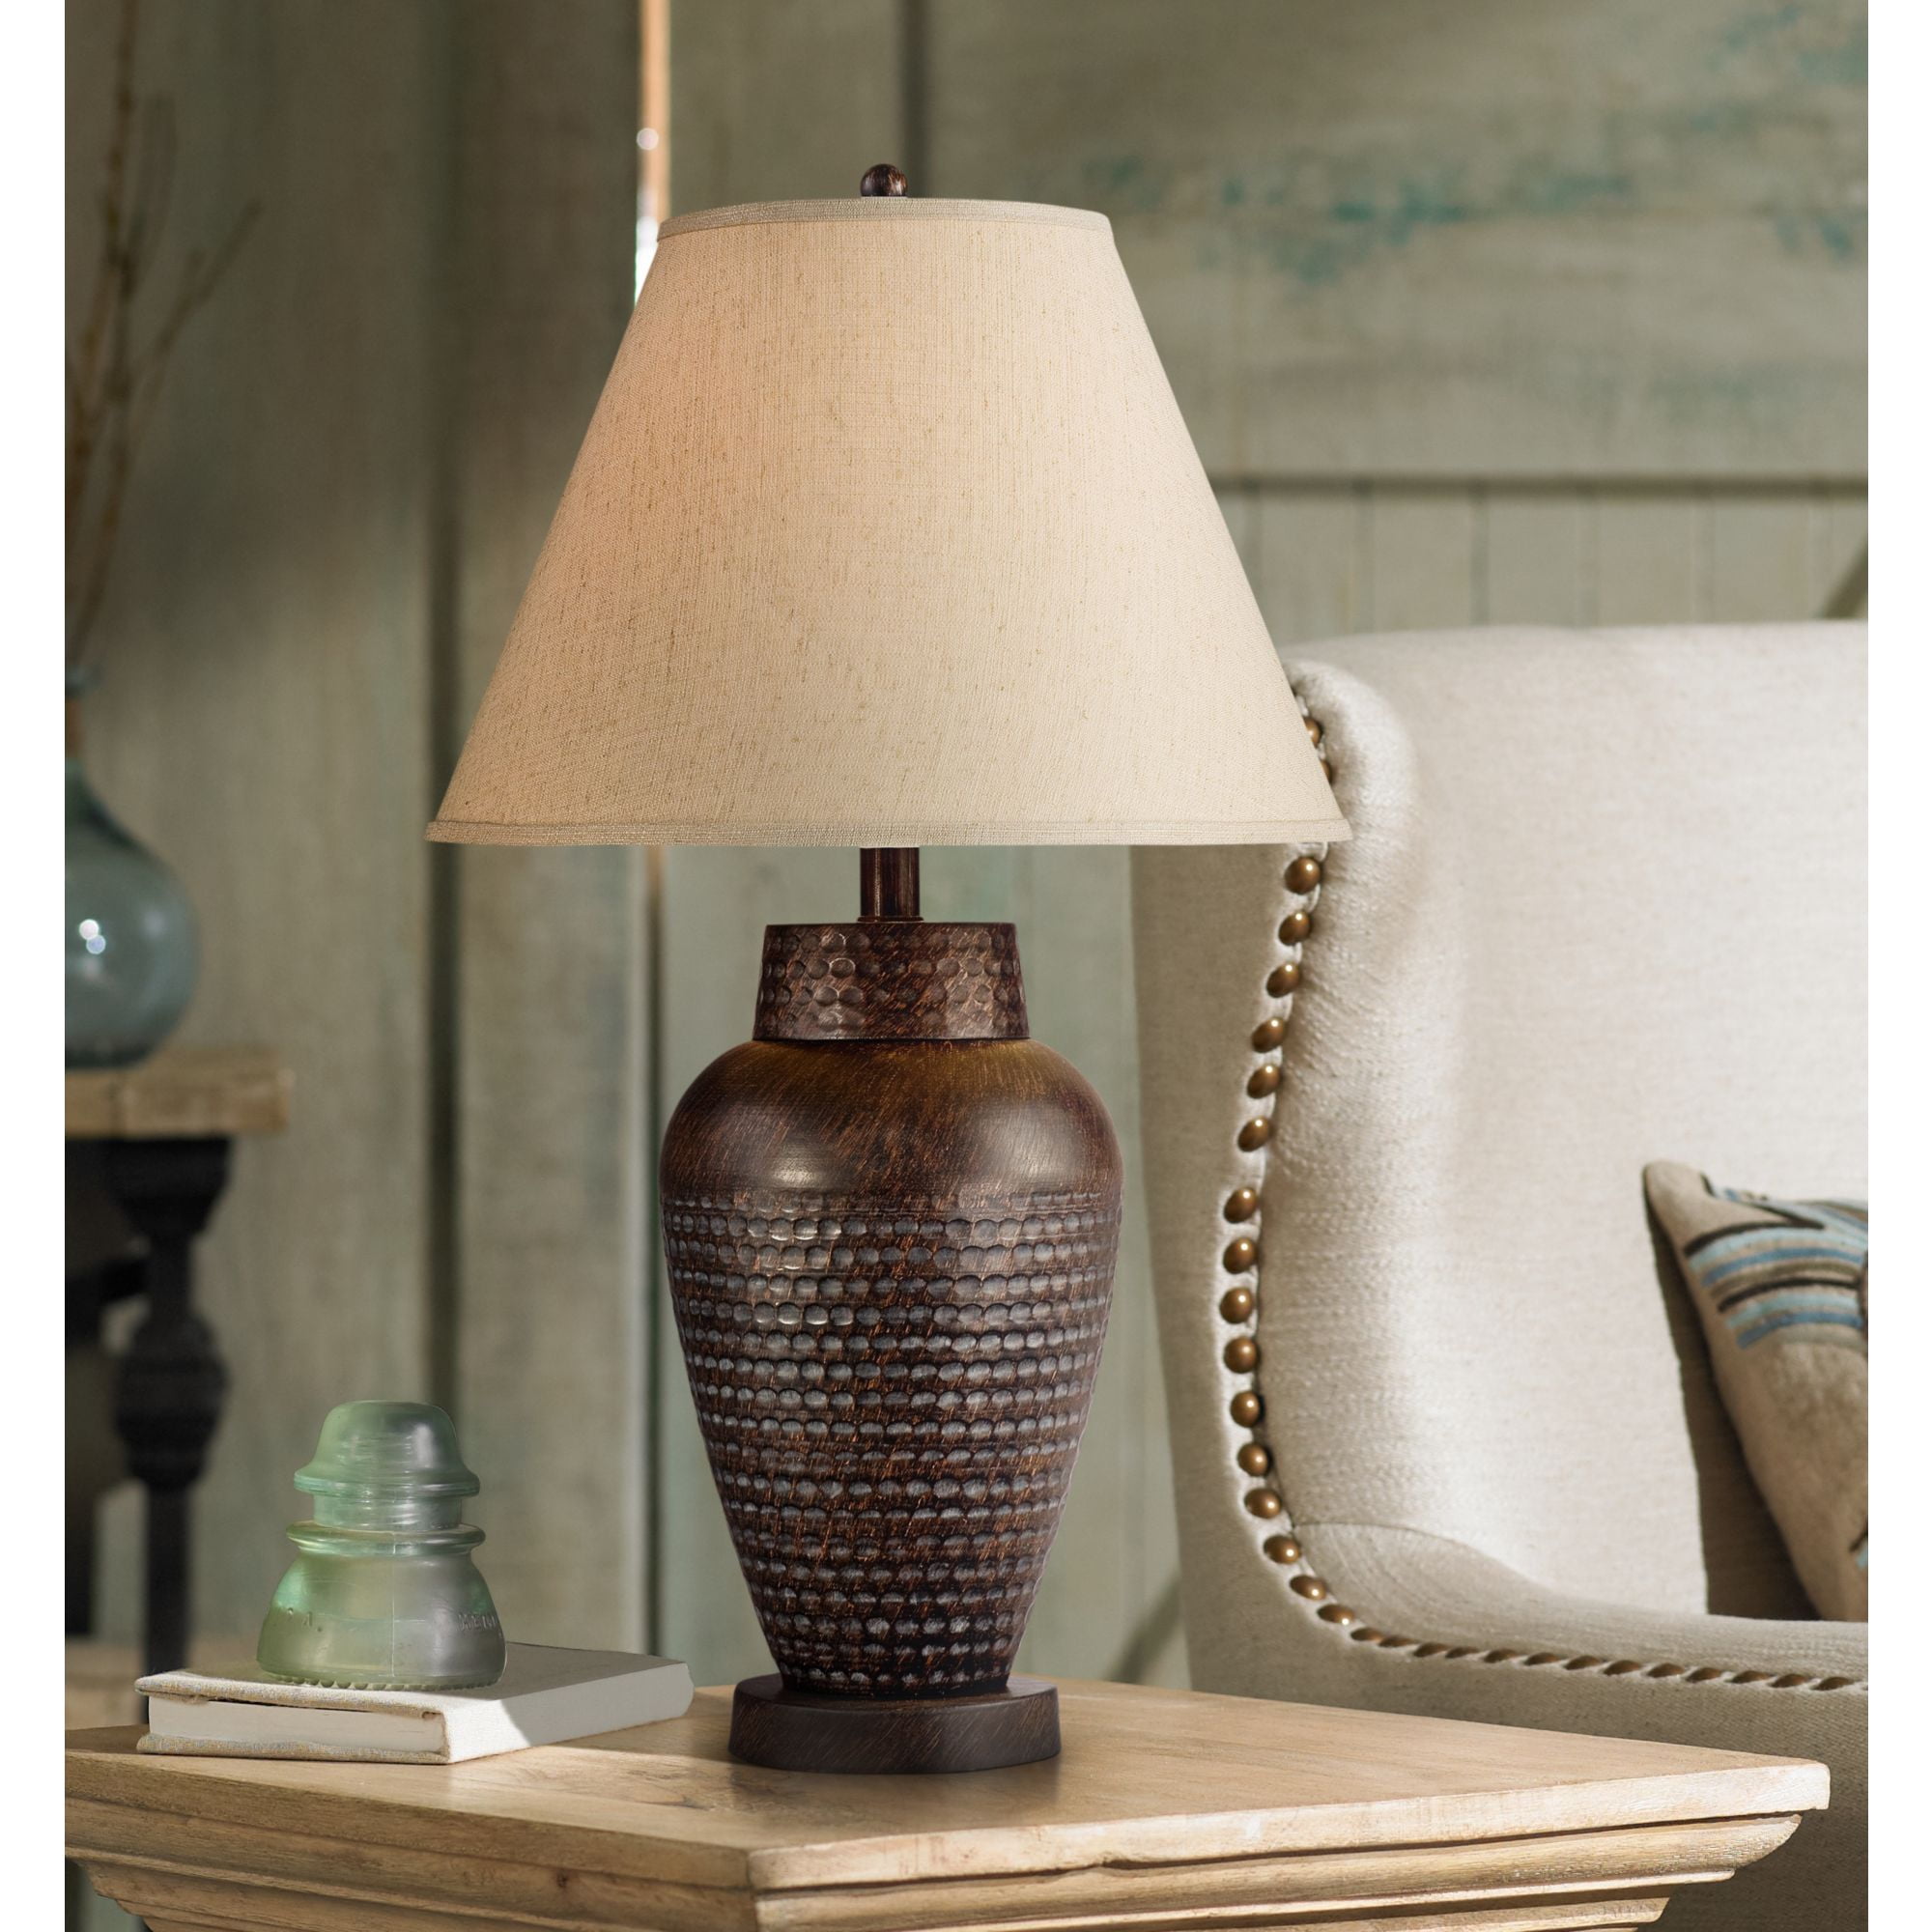 Marlowe Rustic Industrial Table Lamp with USB and AC Power Outlet Workstation Charging Base Bronze Woven Metal Burlap Fabric Drum Shade for Living Room Bedroom House Beside Franklin Iron Works